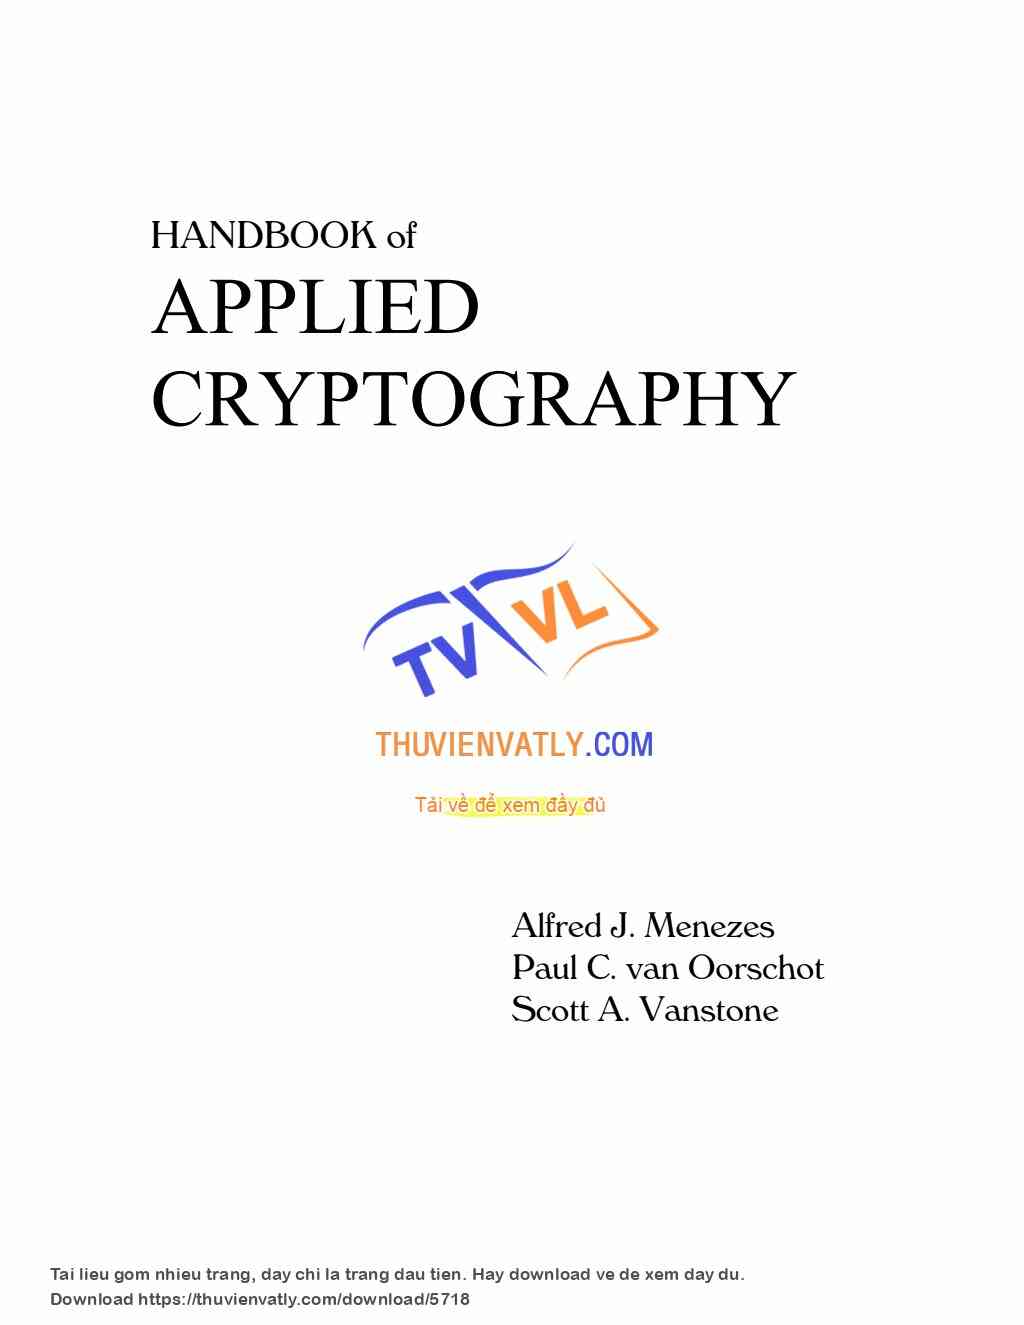 Hnadbook of Applied Cryptography